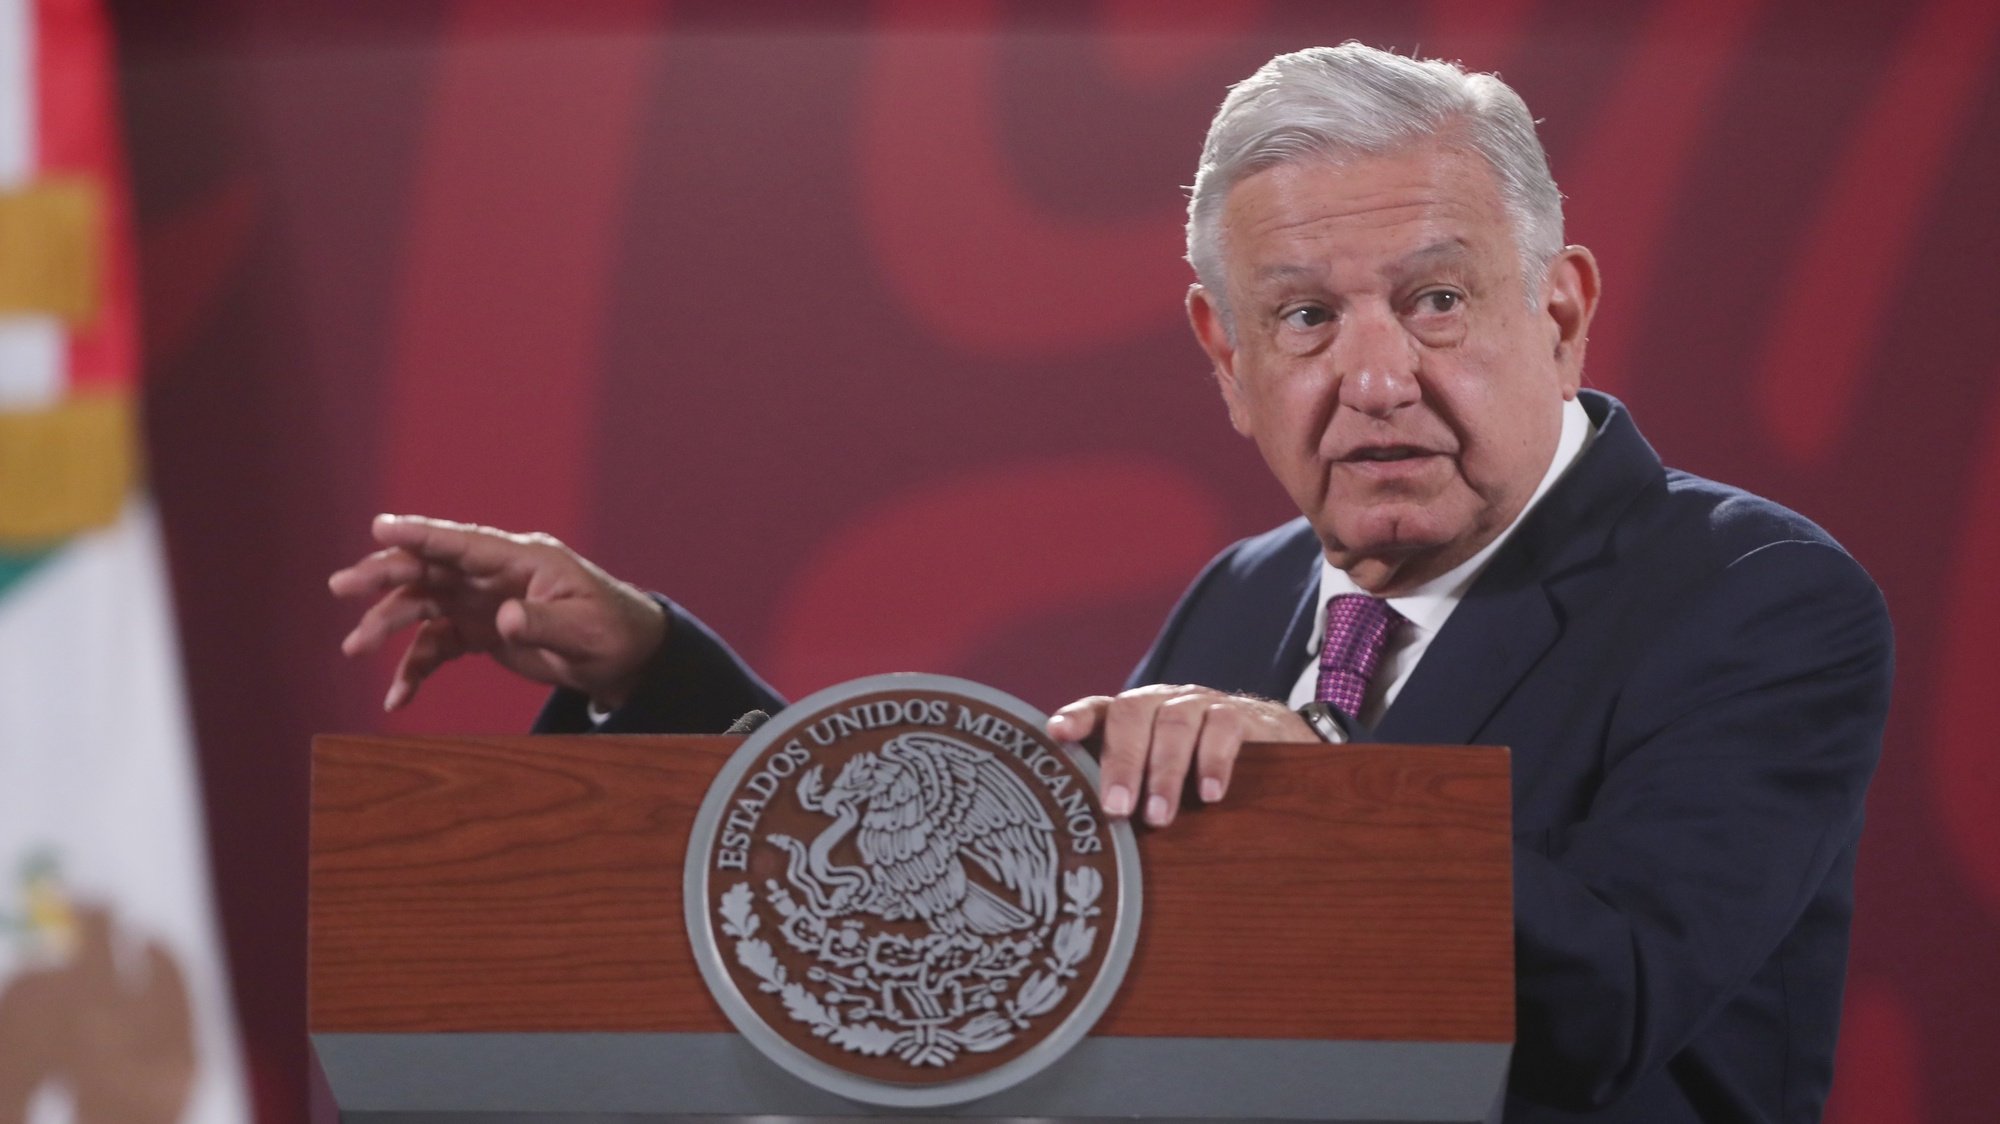 epa10025644 President of Mexico Andres Manuel Lopez Obrador speaks during his morning press conference at the National Palace in Mexico City, Mexico, 21 June 2022. Lopez Obrador said he will ask his US counterpart Joe Biden to review the case of Australian journalist Julian Assange, whom the US authorities seek to prosecute for the serious revelations on his WikiLeaks website.  EPA/SASHENKA GUTIERREZ